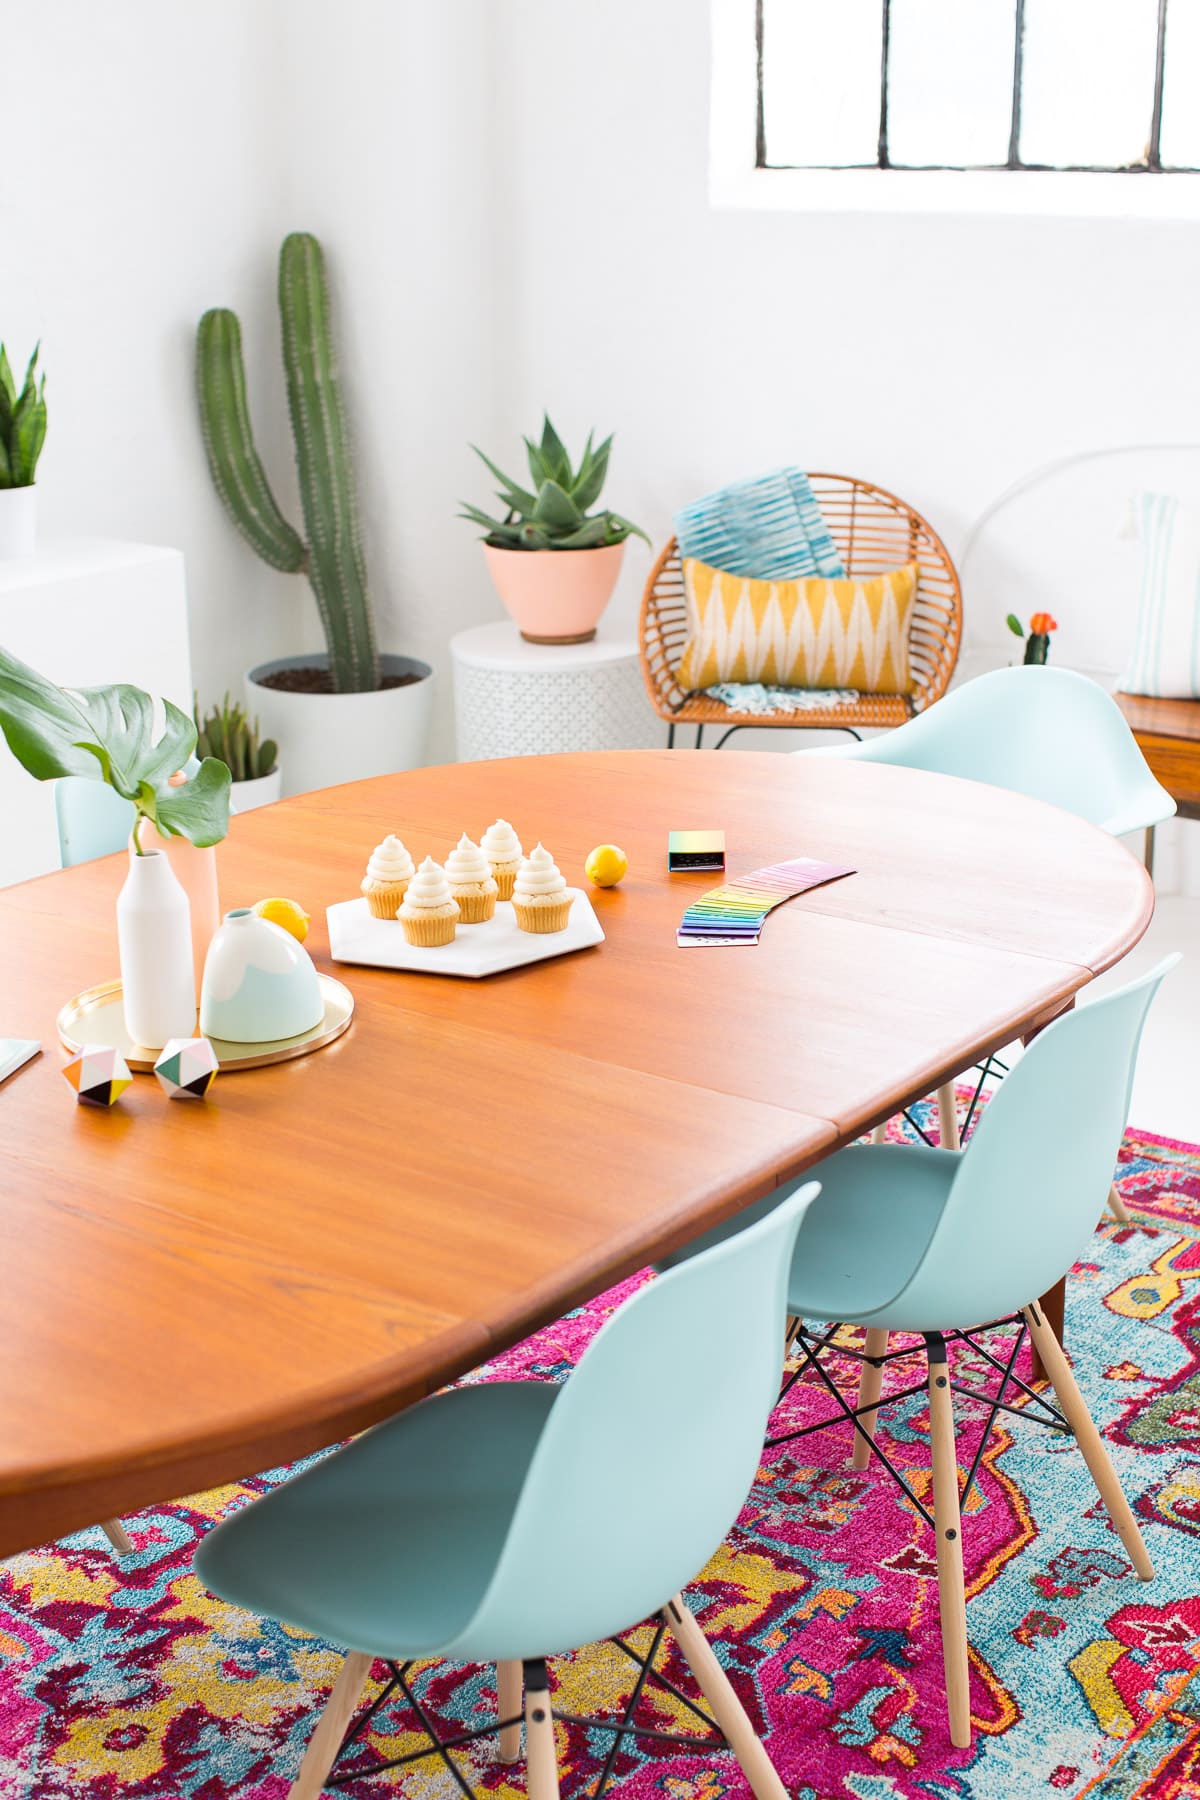 How decorate a joyful and modern dining room for Summer! - sugar and cloth - ashley rose - houston blogger